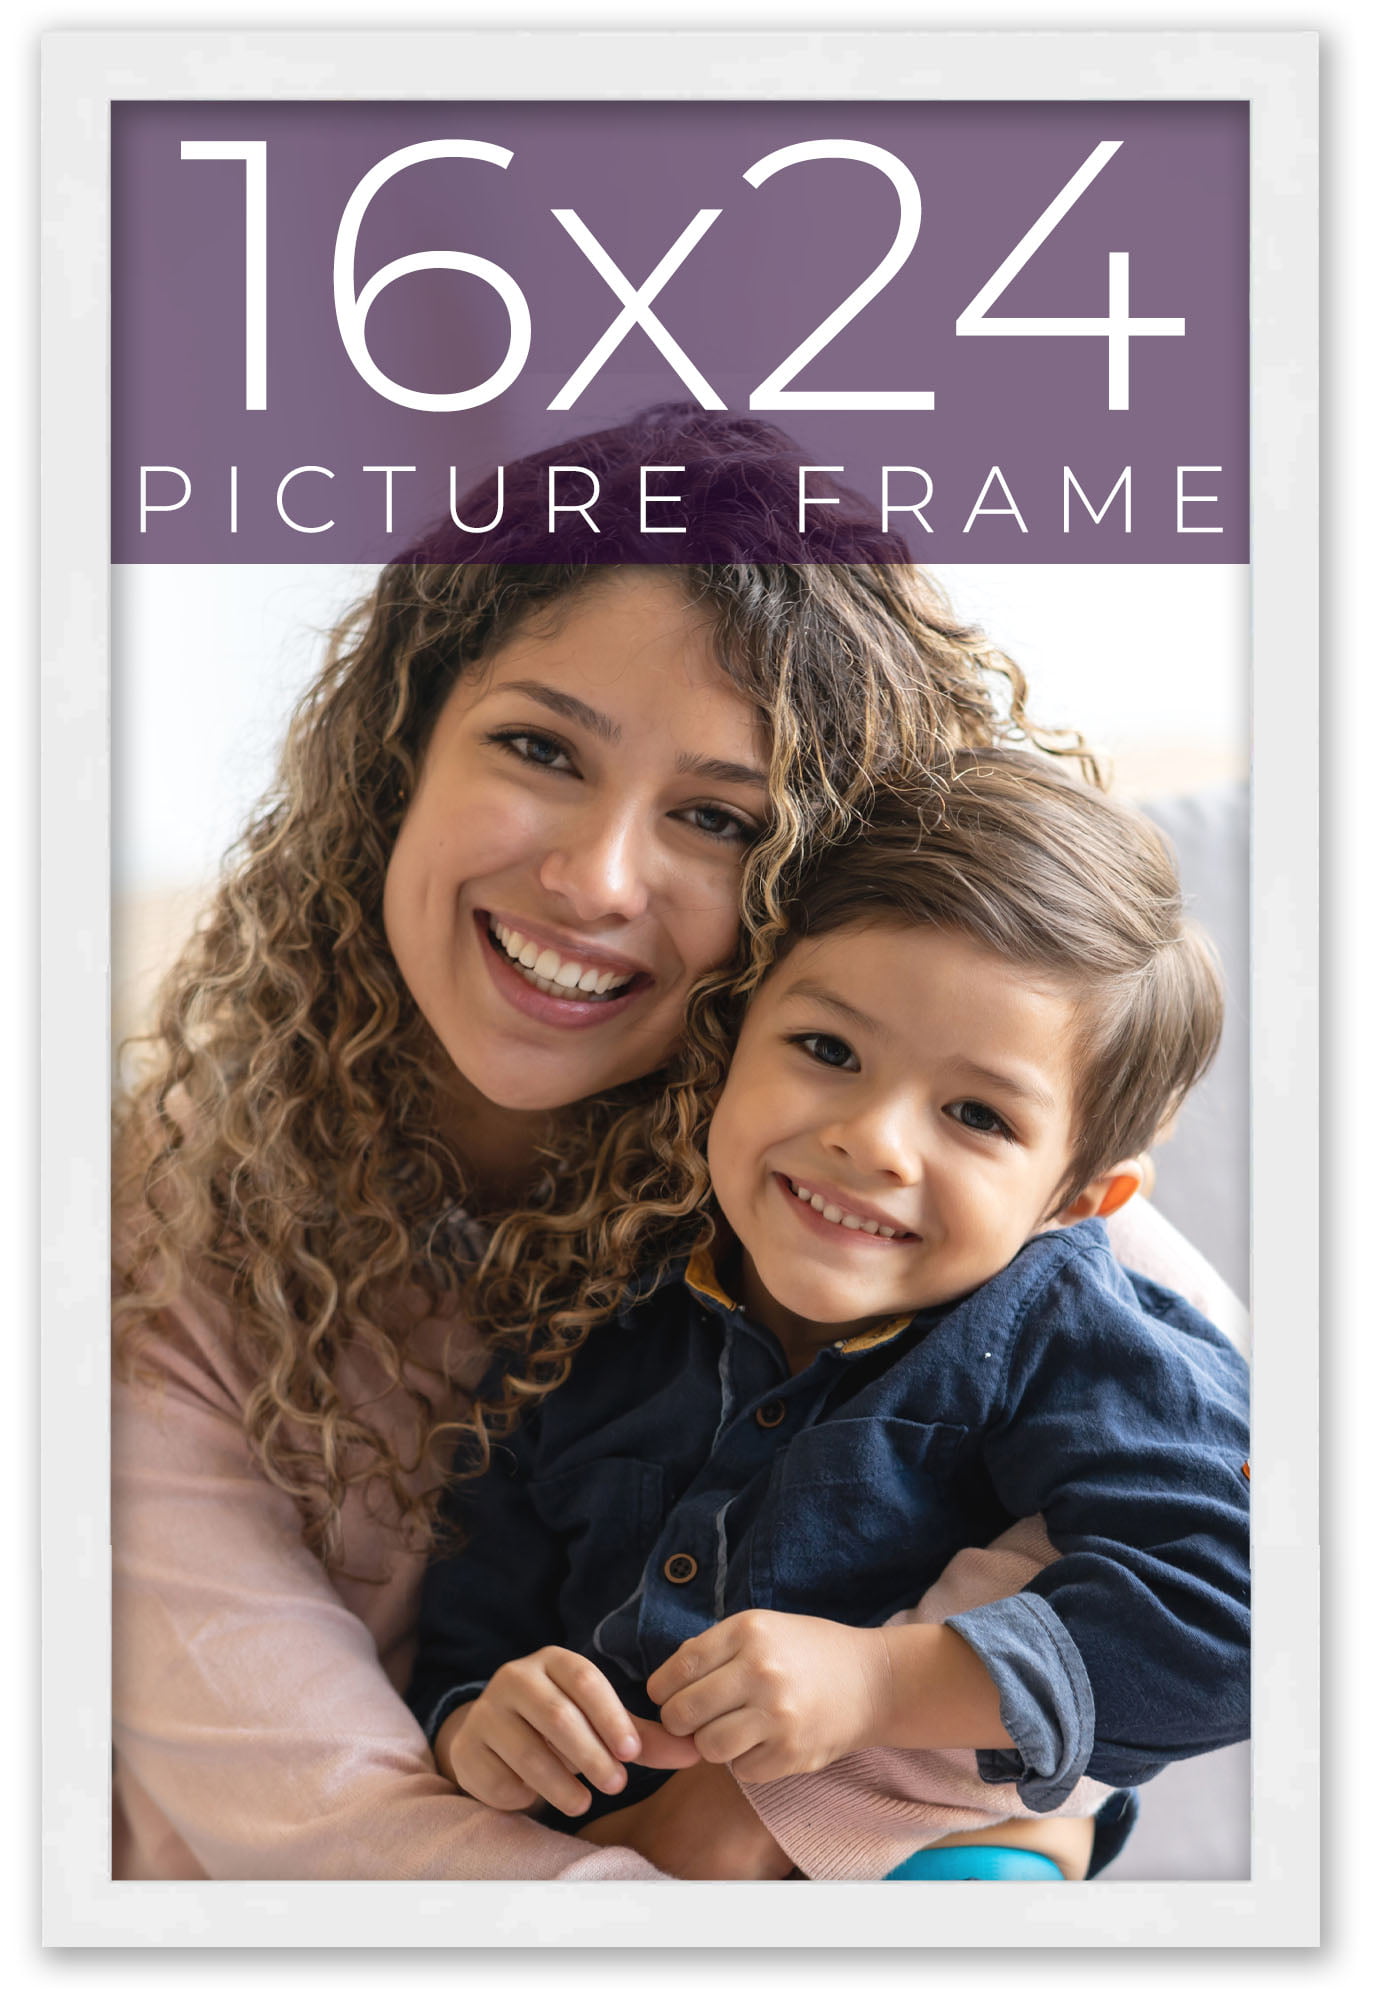 16x24 Frame White Real Wood Picture Frame Width 0.75 inches